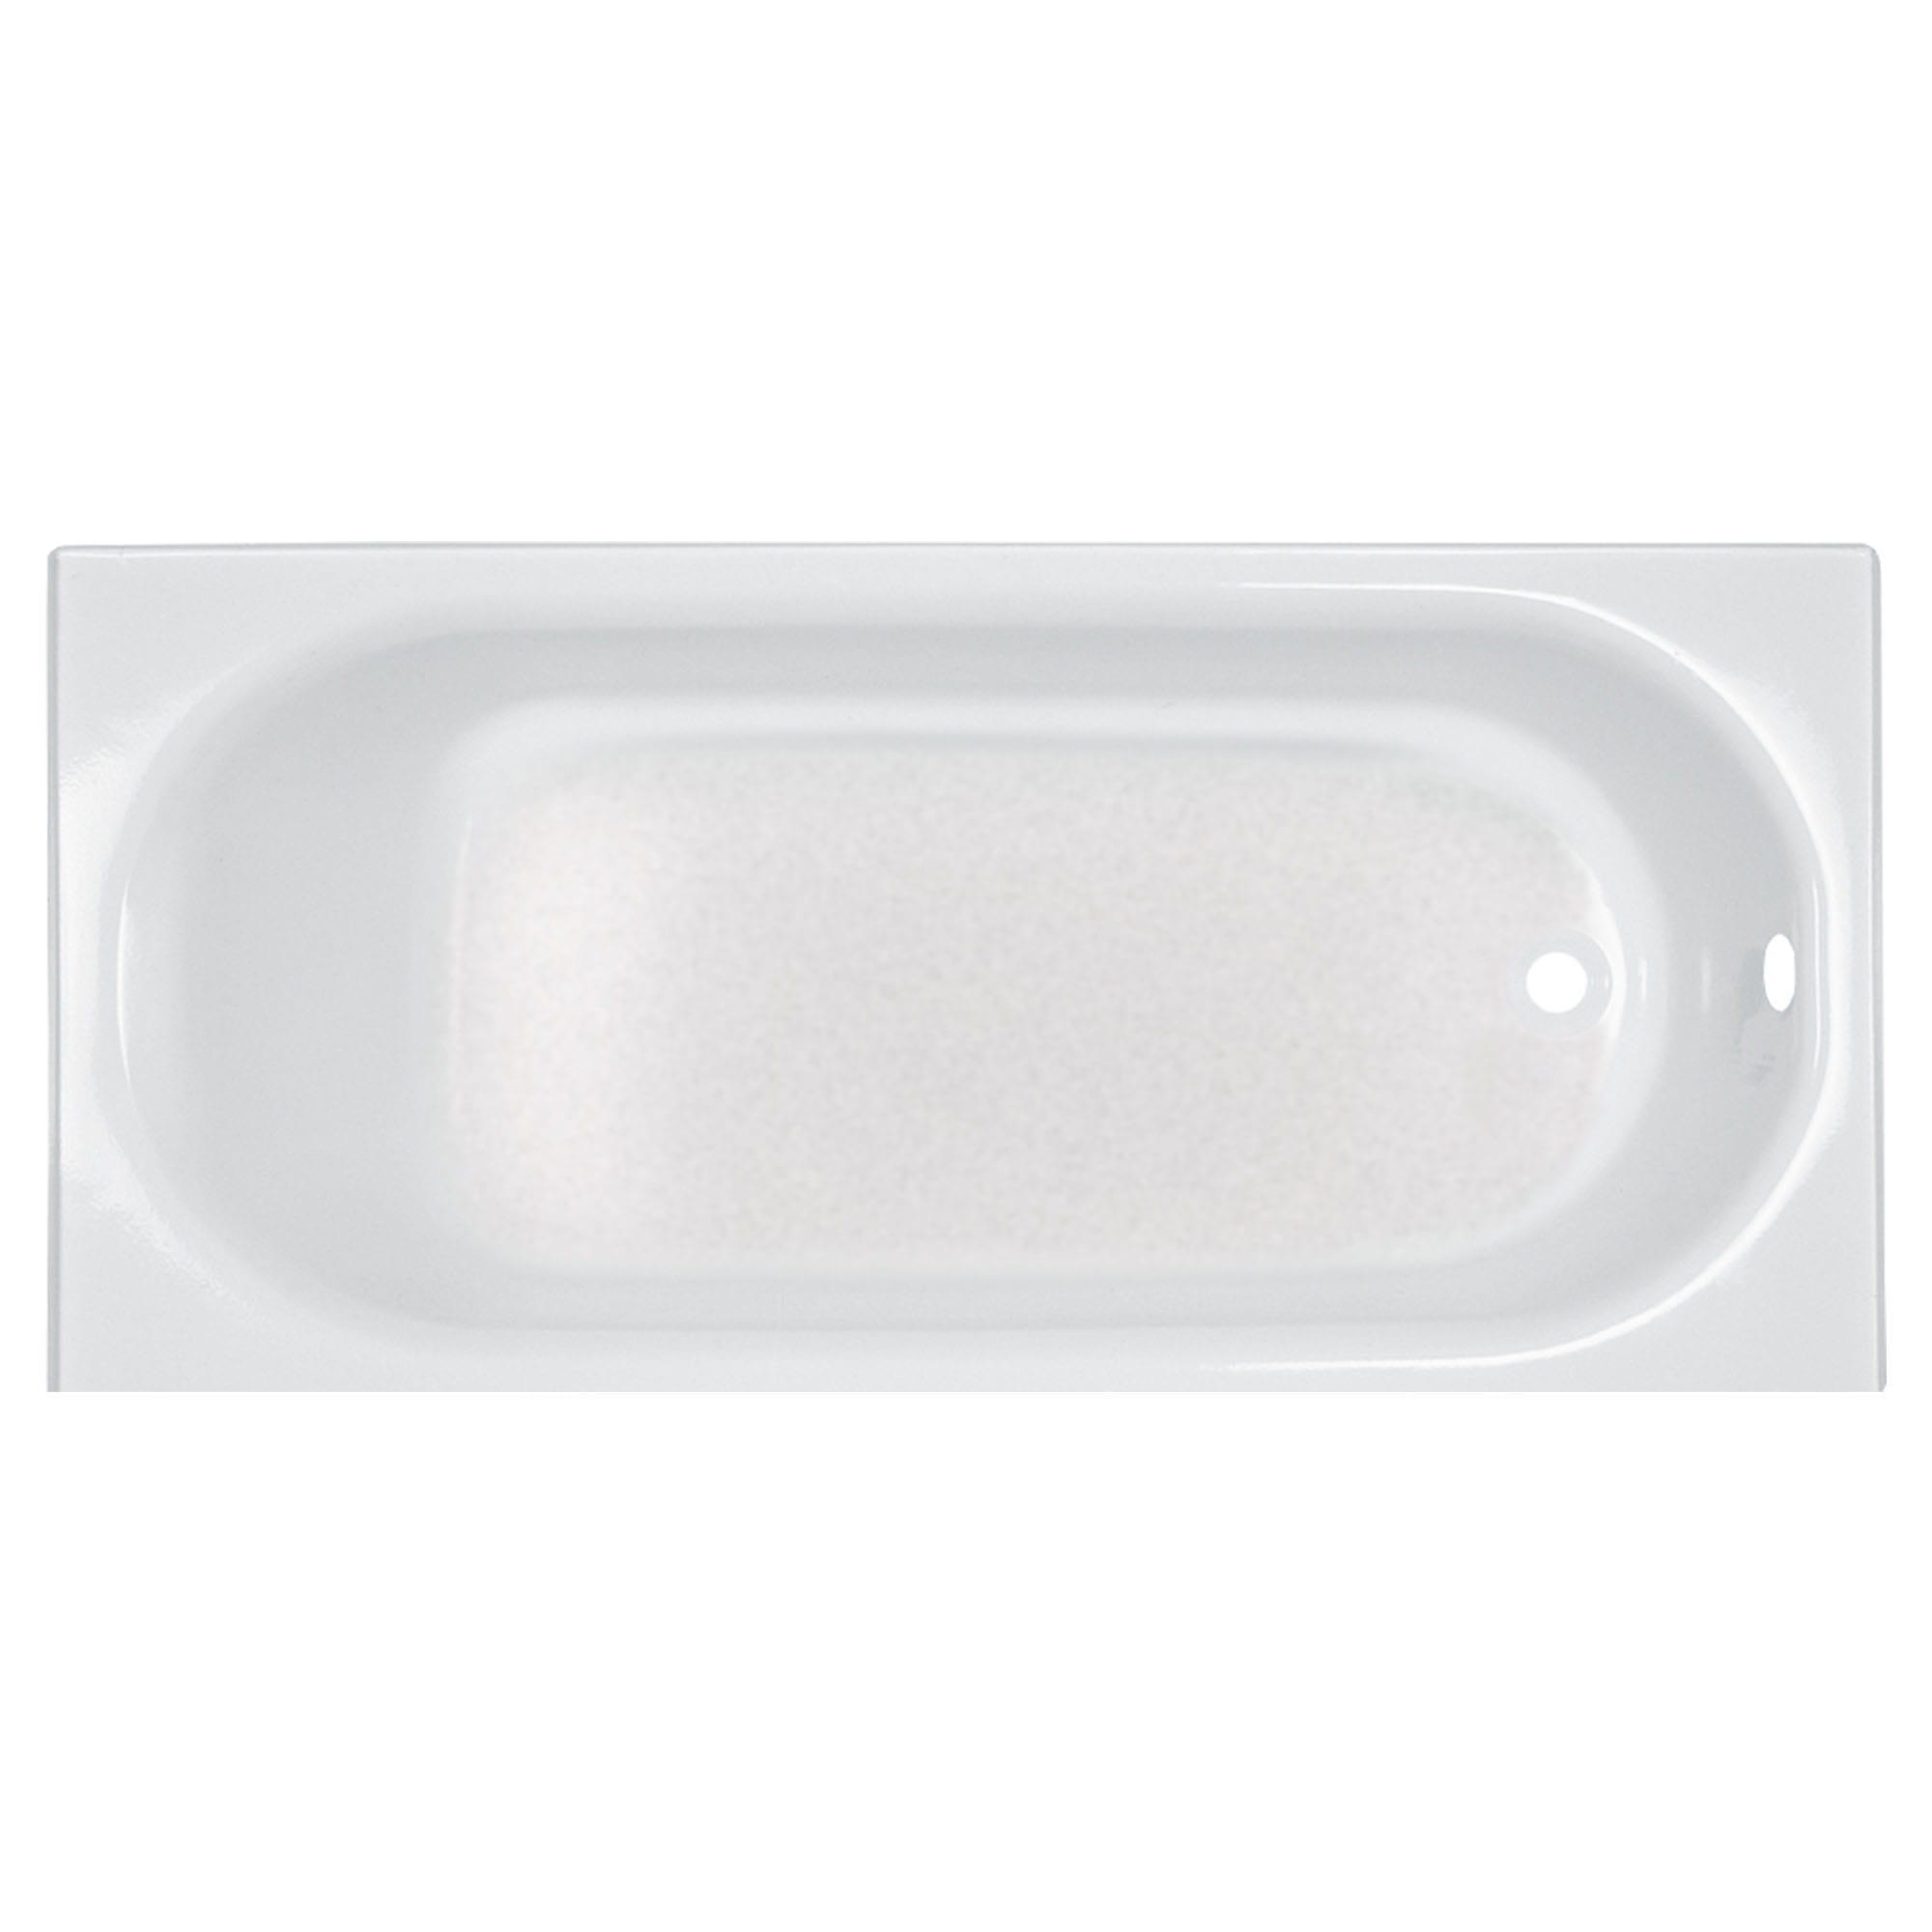 Princeton Americast 60 x 30 Inch Integral Apron Bathtub with Right Hand Outlet WHITE